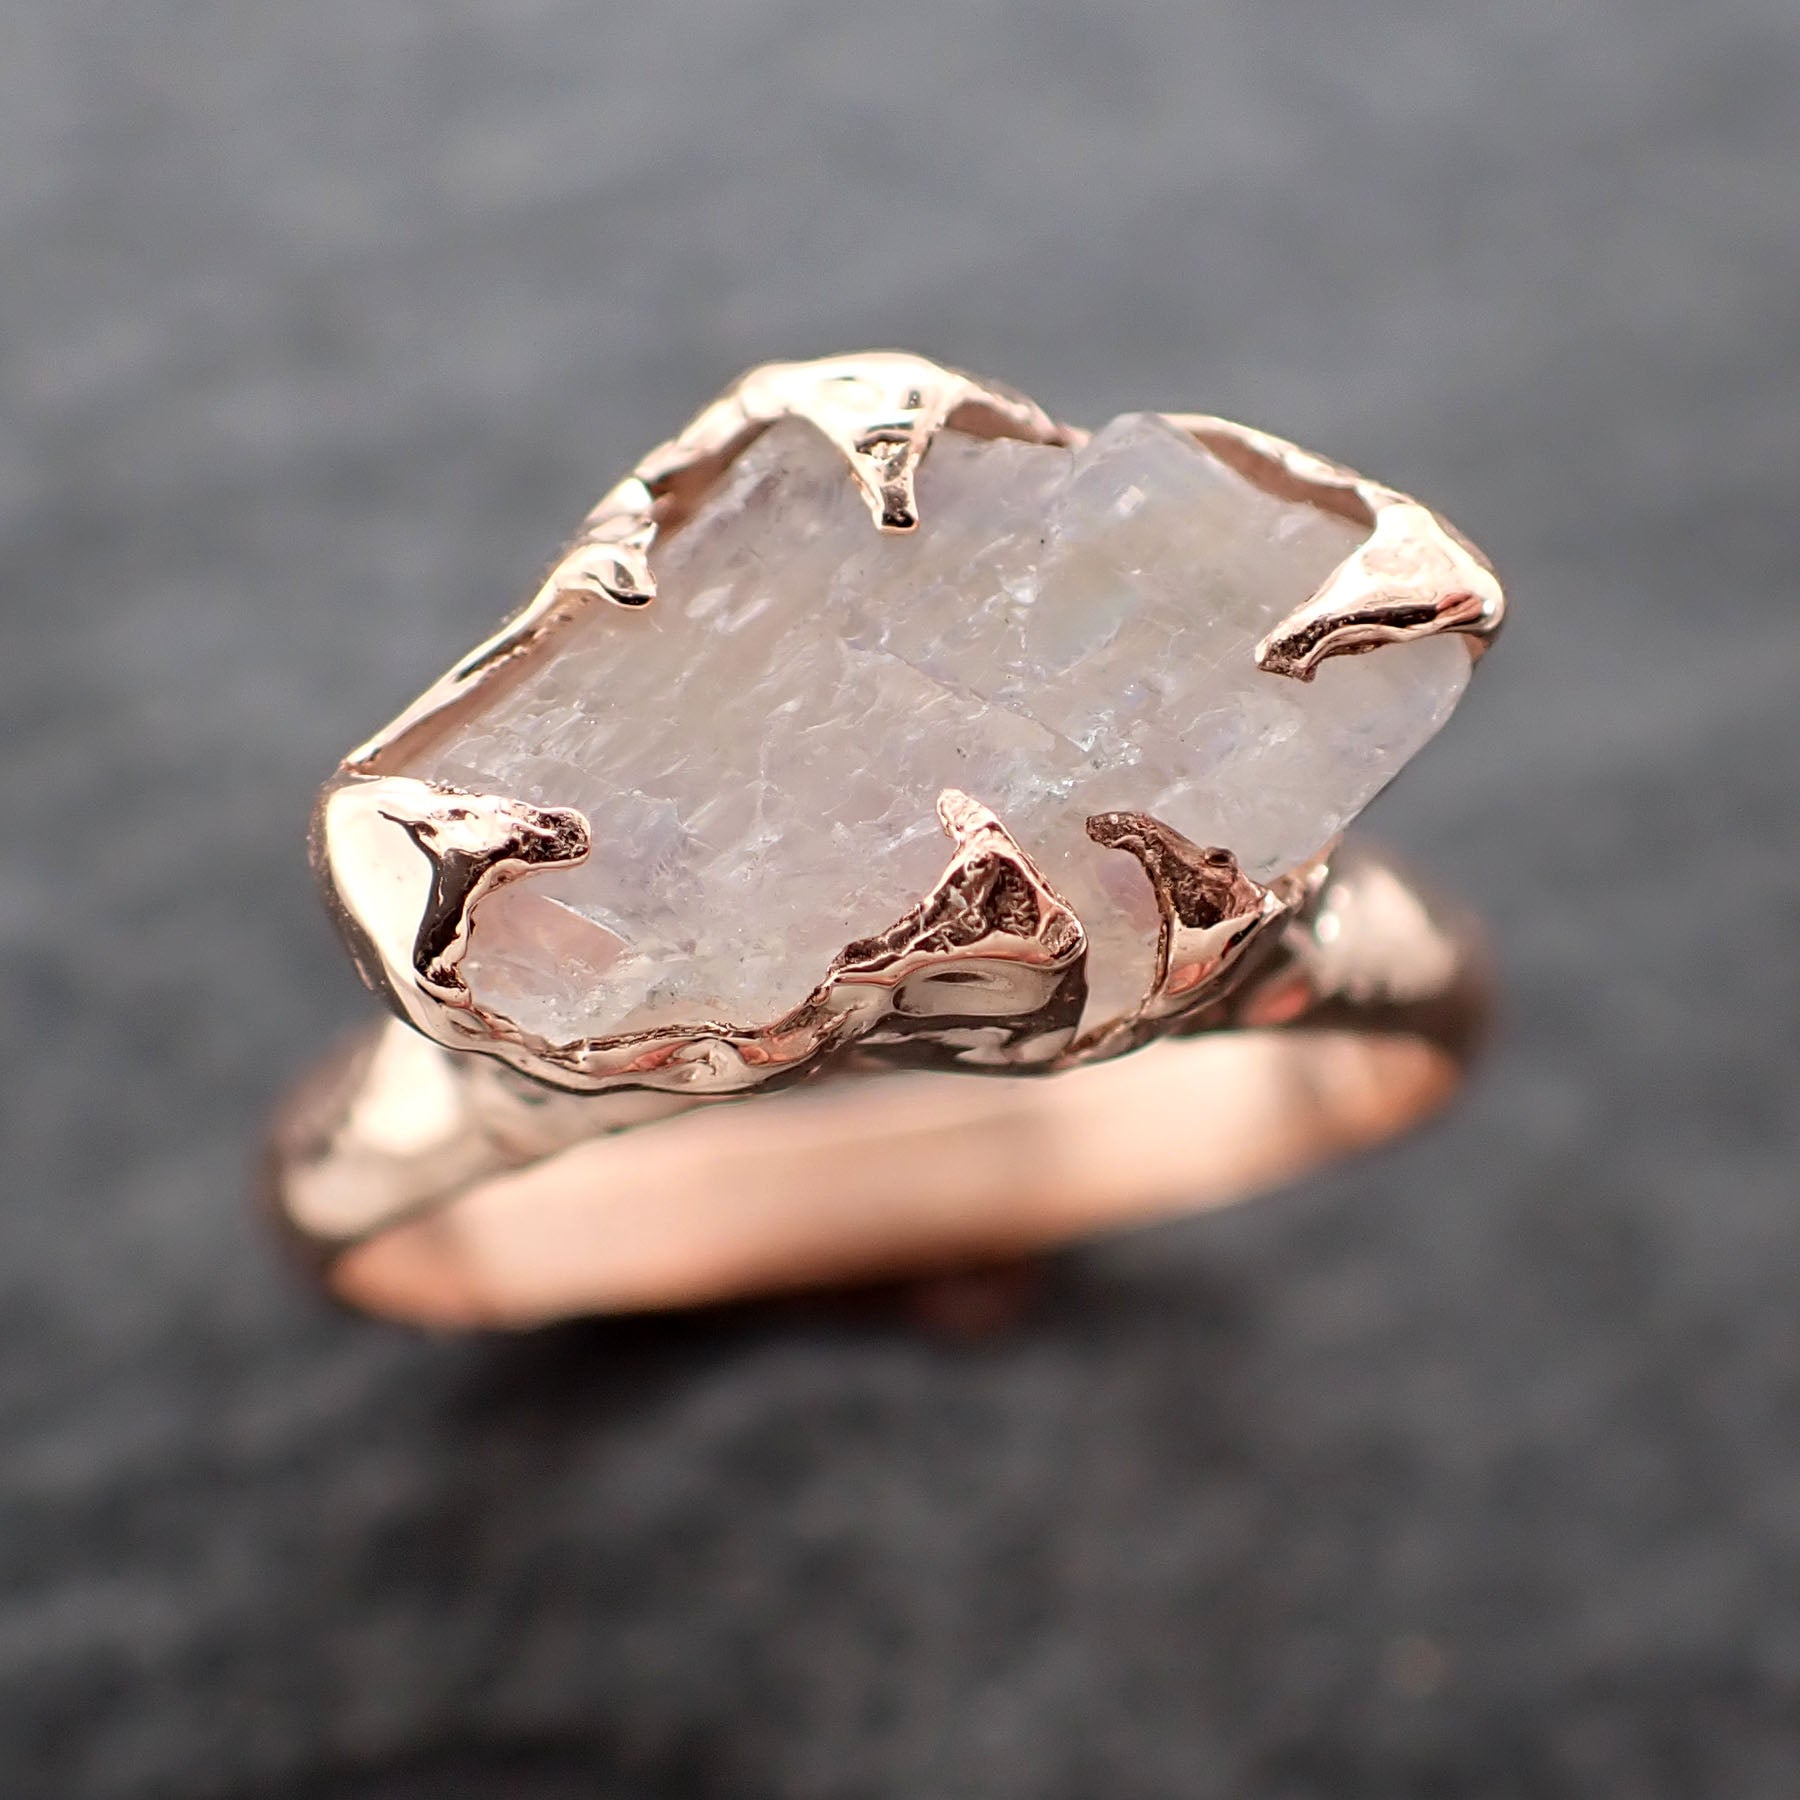 Rough Moonstone 14k Rose Gold Ring Gemstone Solitaire recycled statement cocktail statement 2546